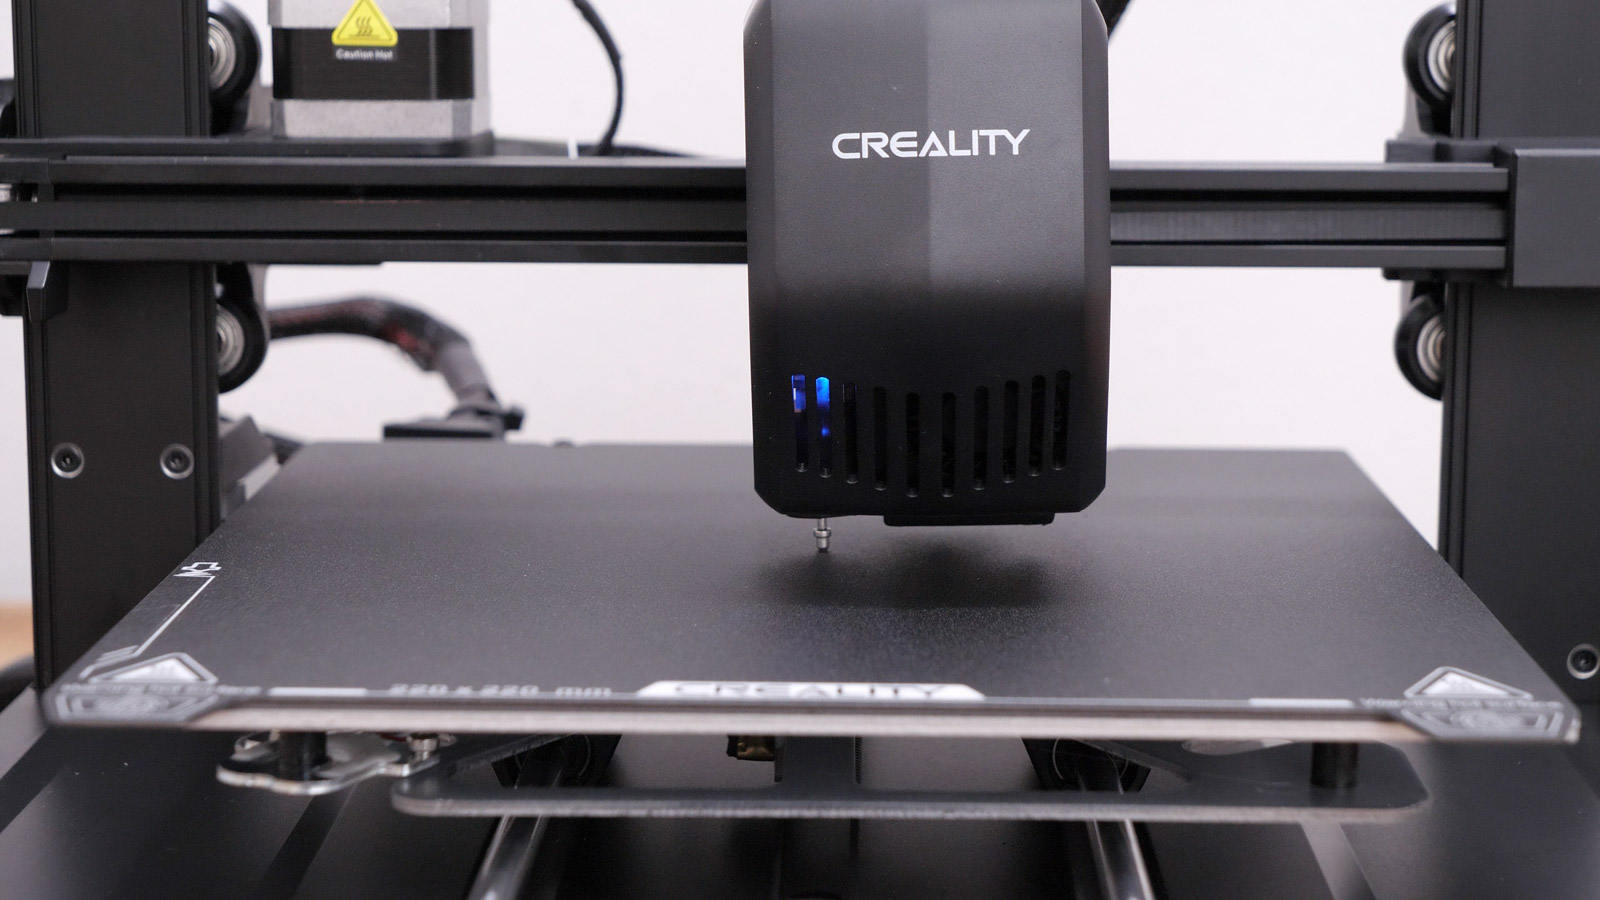 Creality Ender 3 V3 SE Review with Test Prints - Outstanding Value